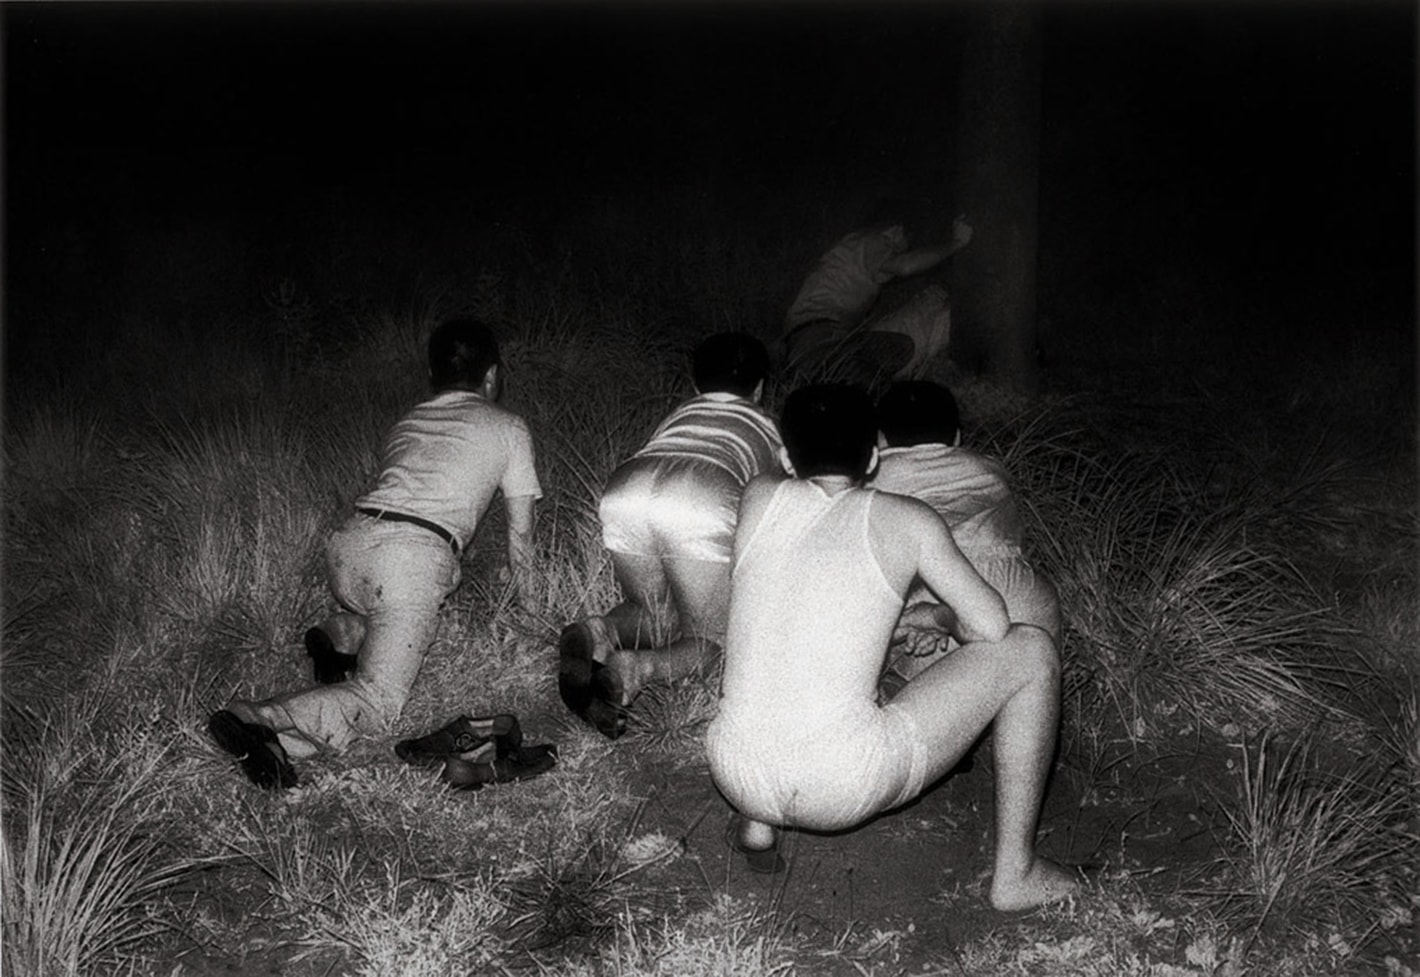 Shikijo: eroticism in Japanese photography